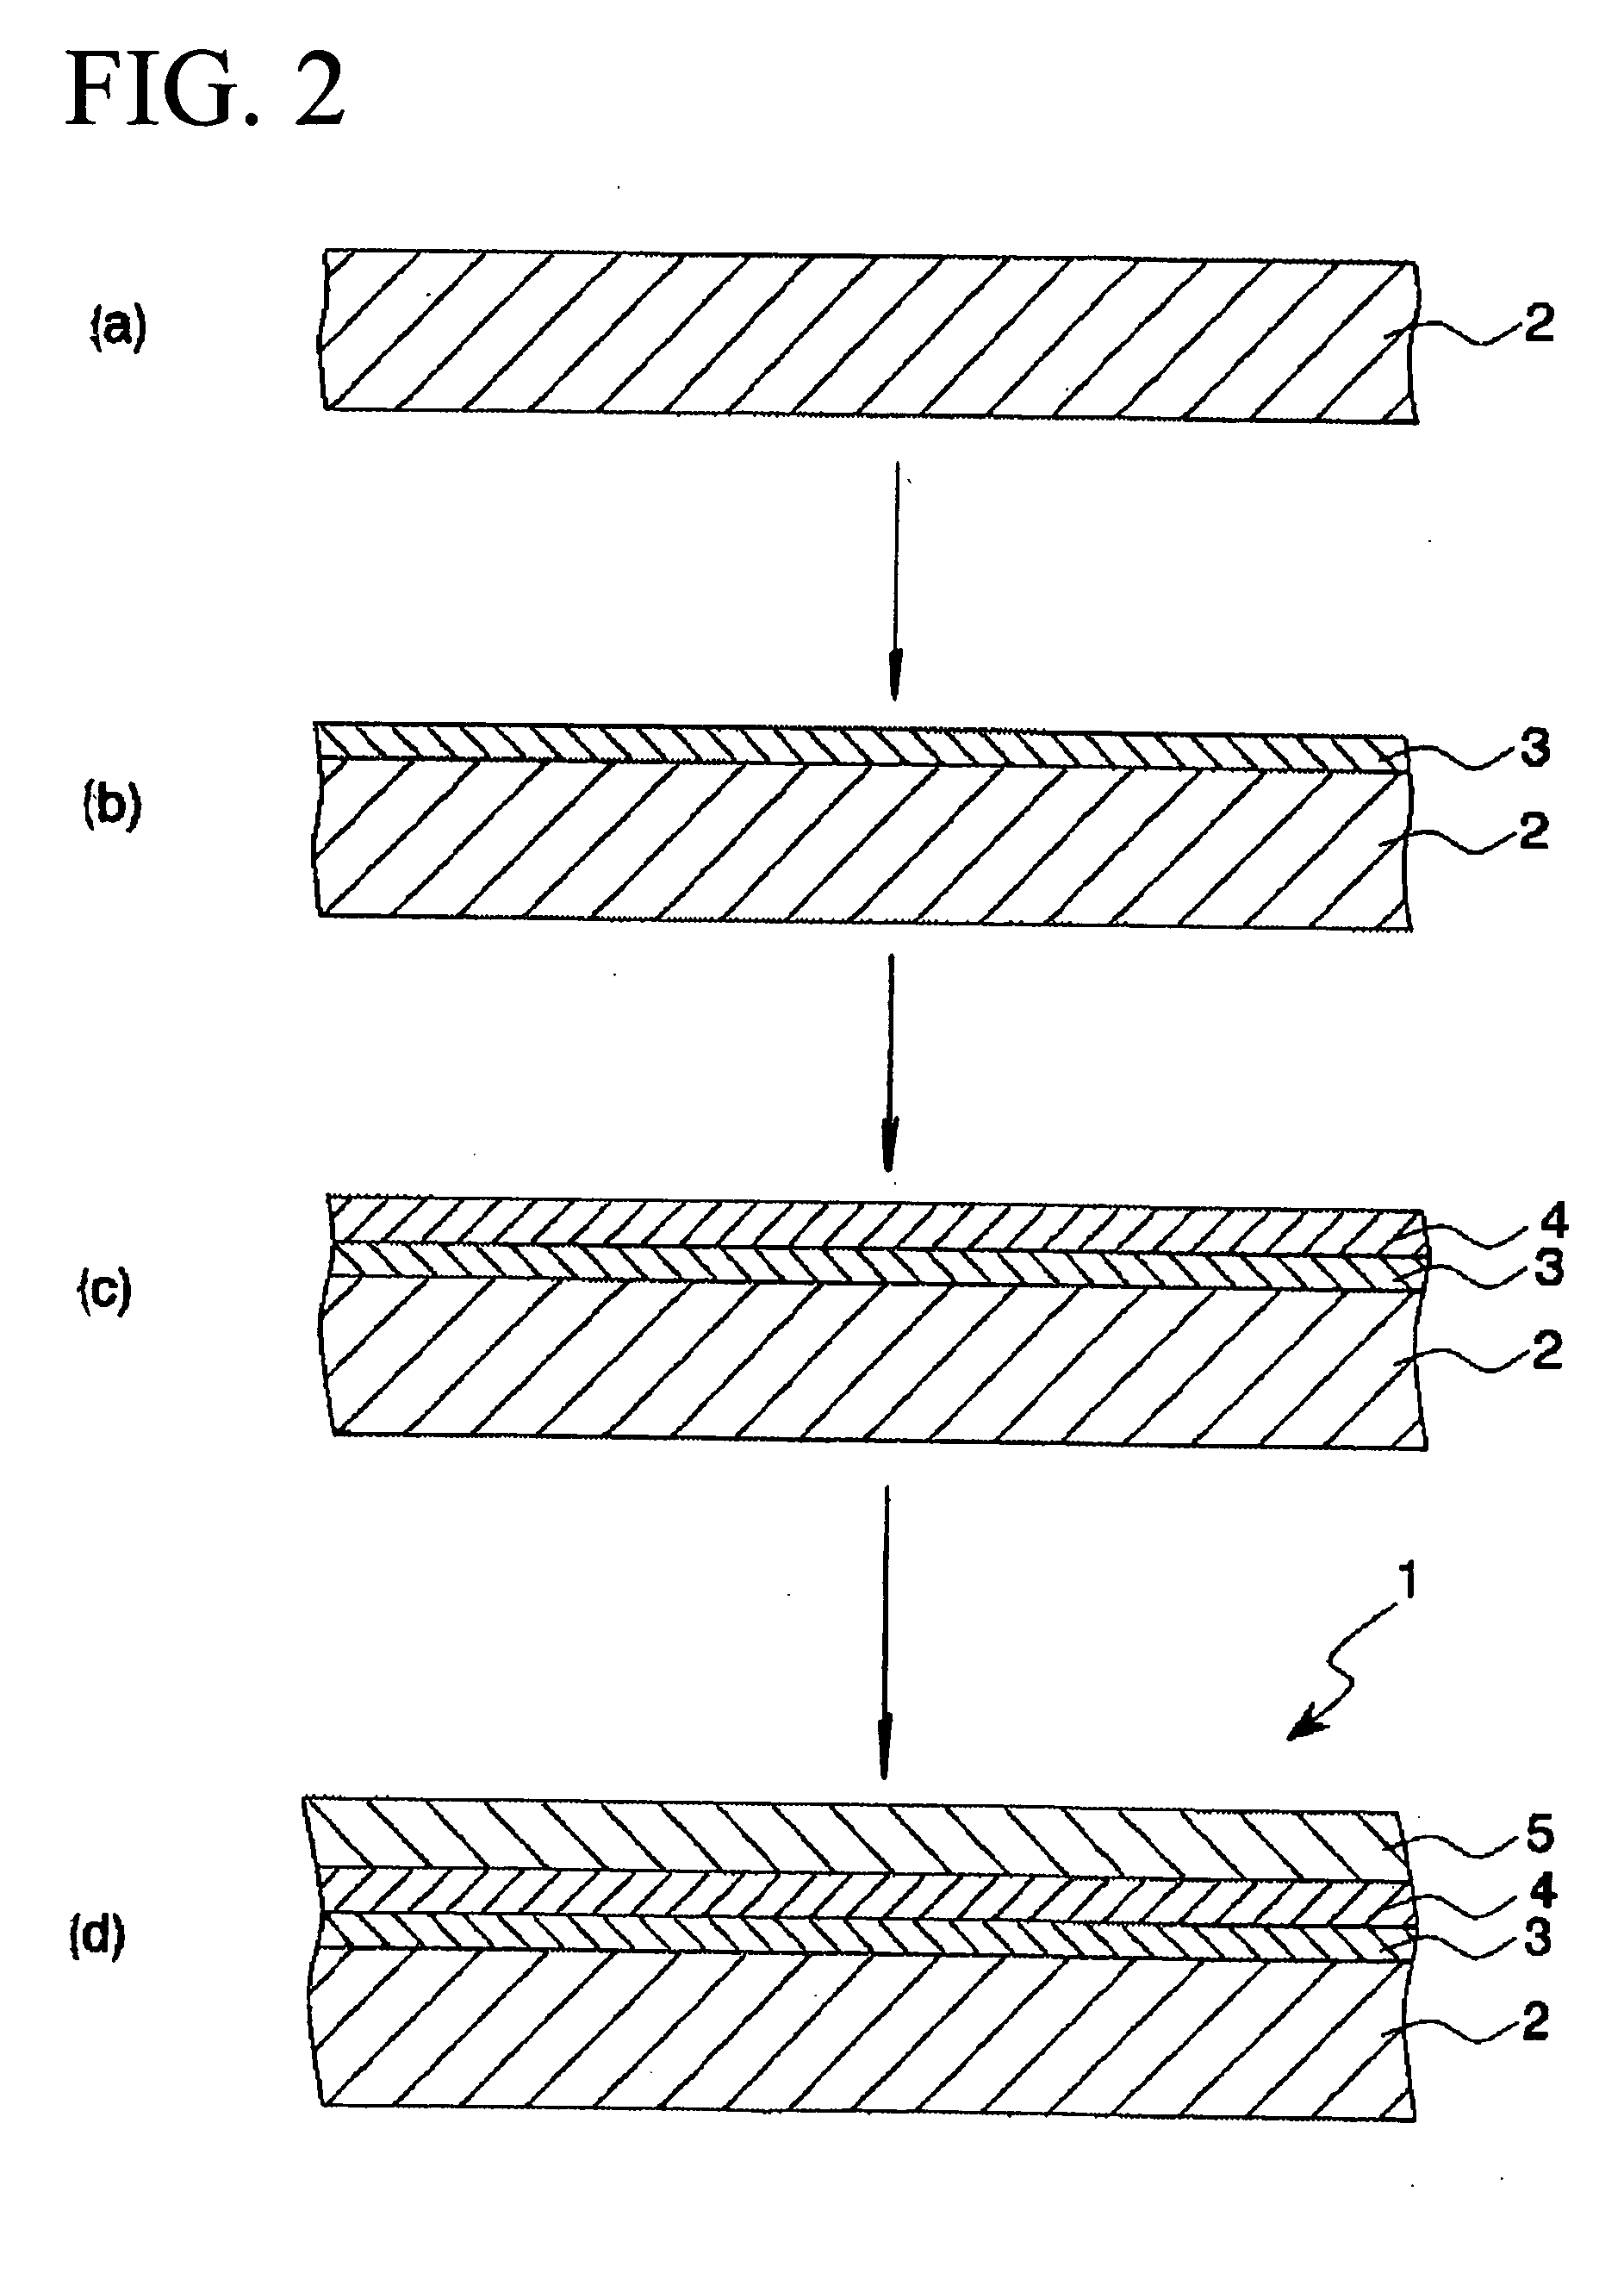 Decorative article, method of manufacturing same, and timepiece